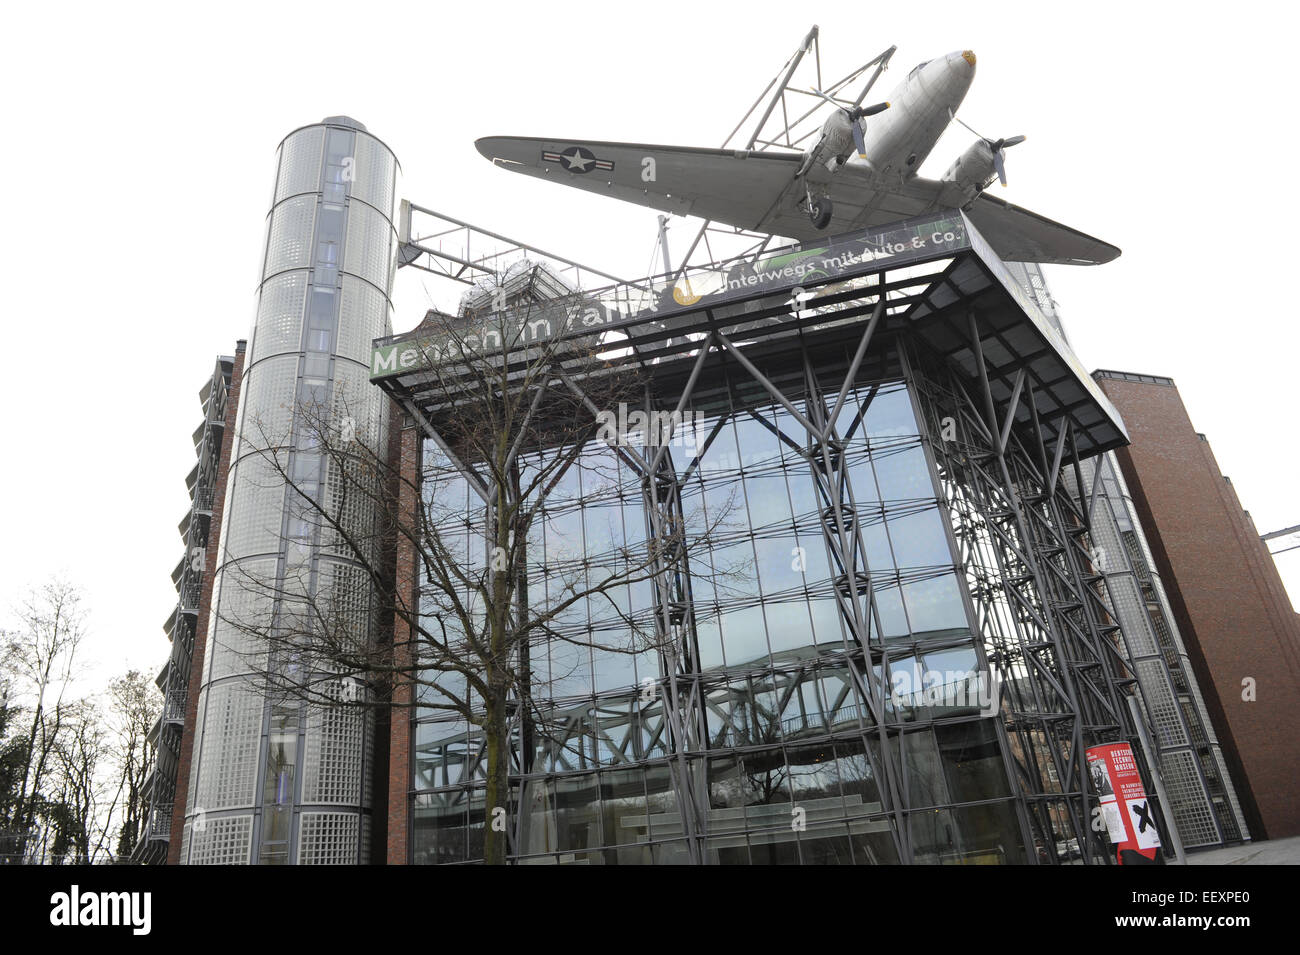 German Museum of Technology. Building on Landwehr Canal, toppe by an US Air Force Douglas C-47B. Berlin. Germany. Stock Photo